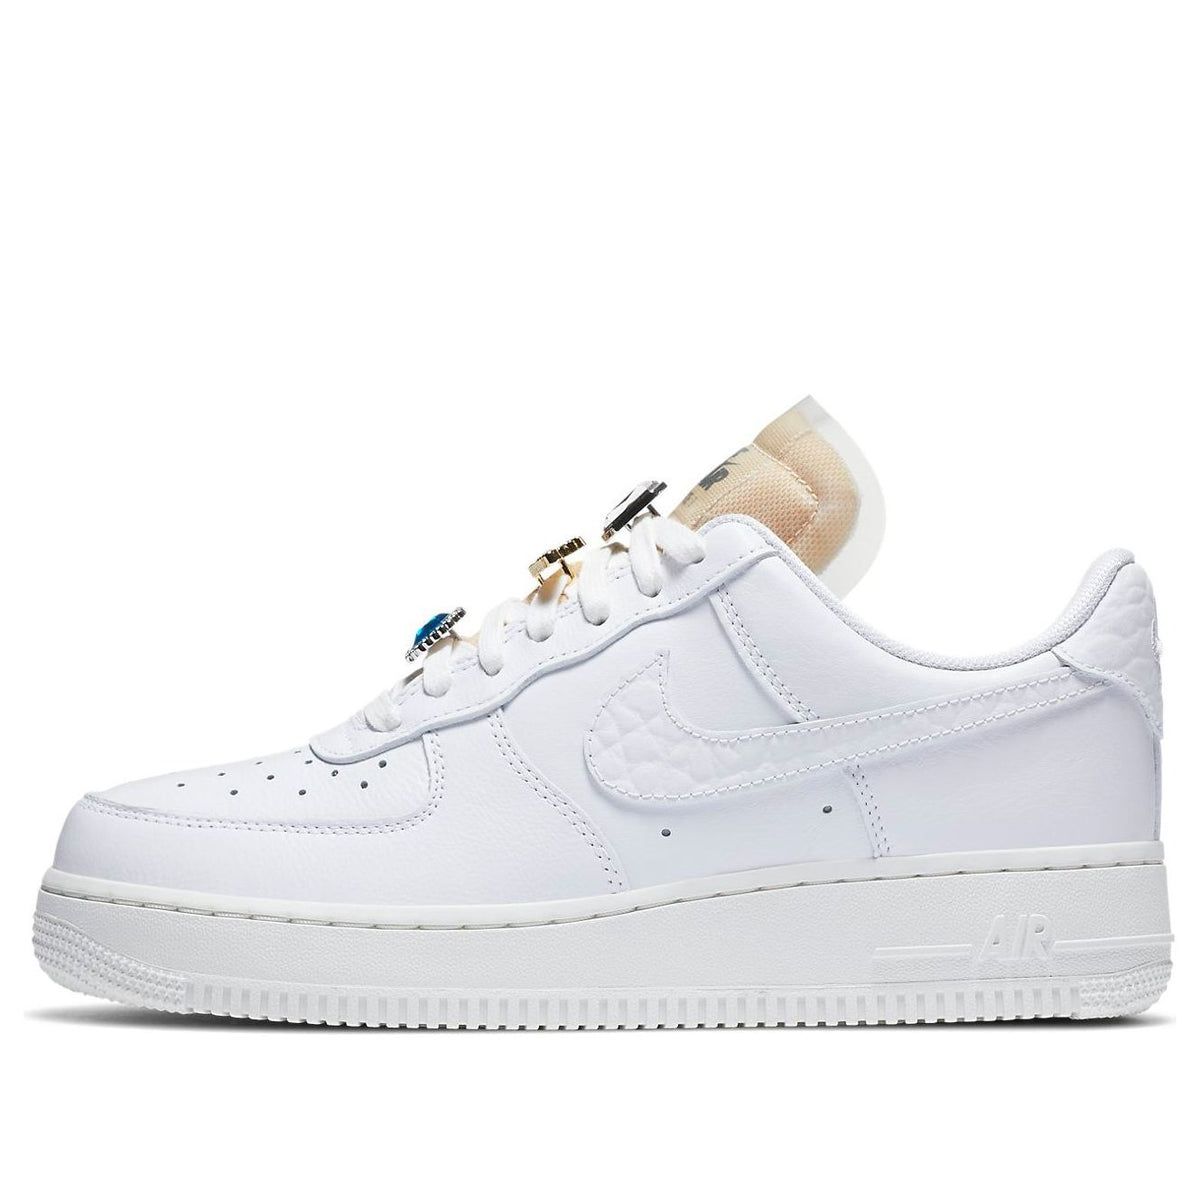 (WMNS) Nike Air Force 1 Low '07 LX 'Bling' CZ8101-100